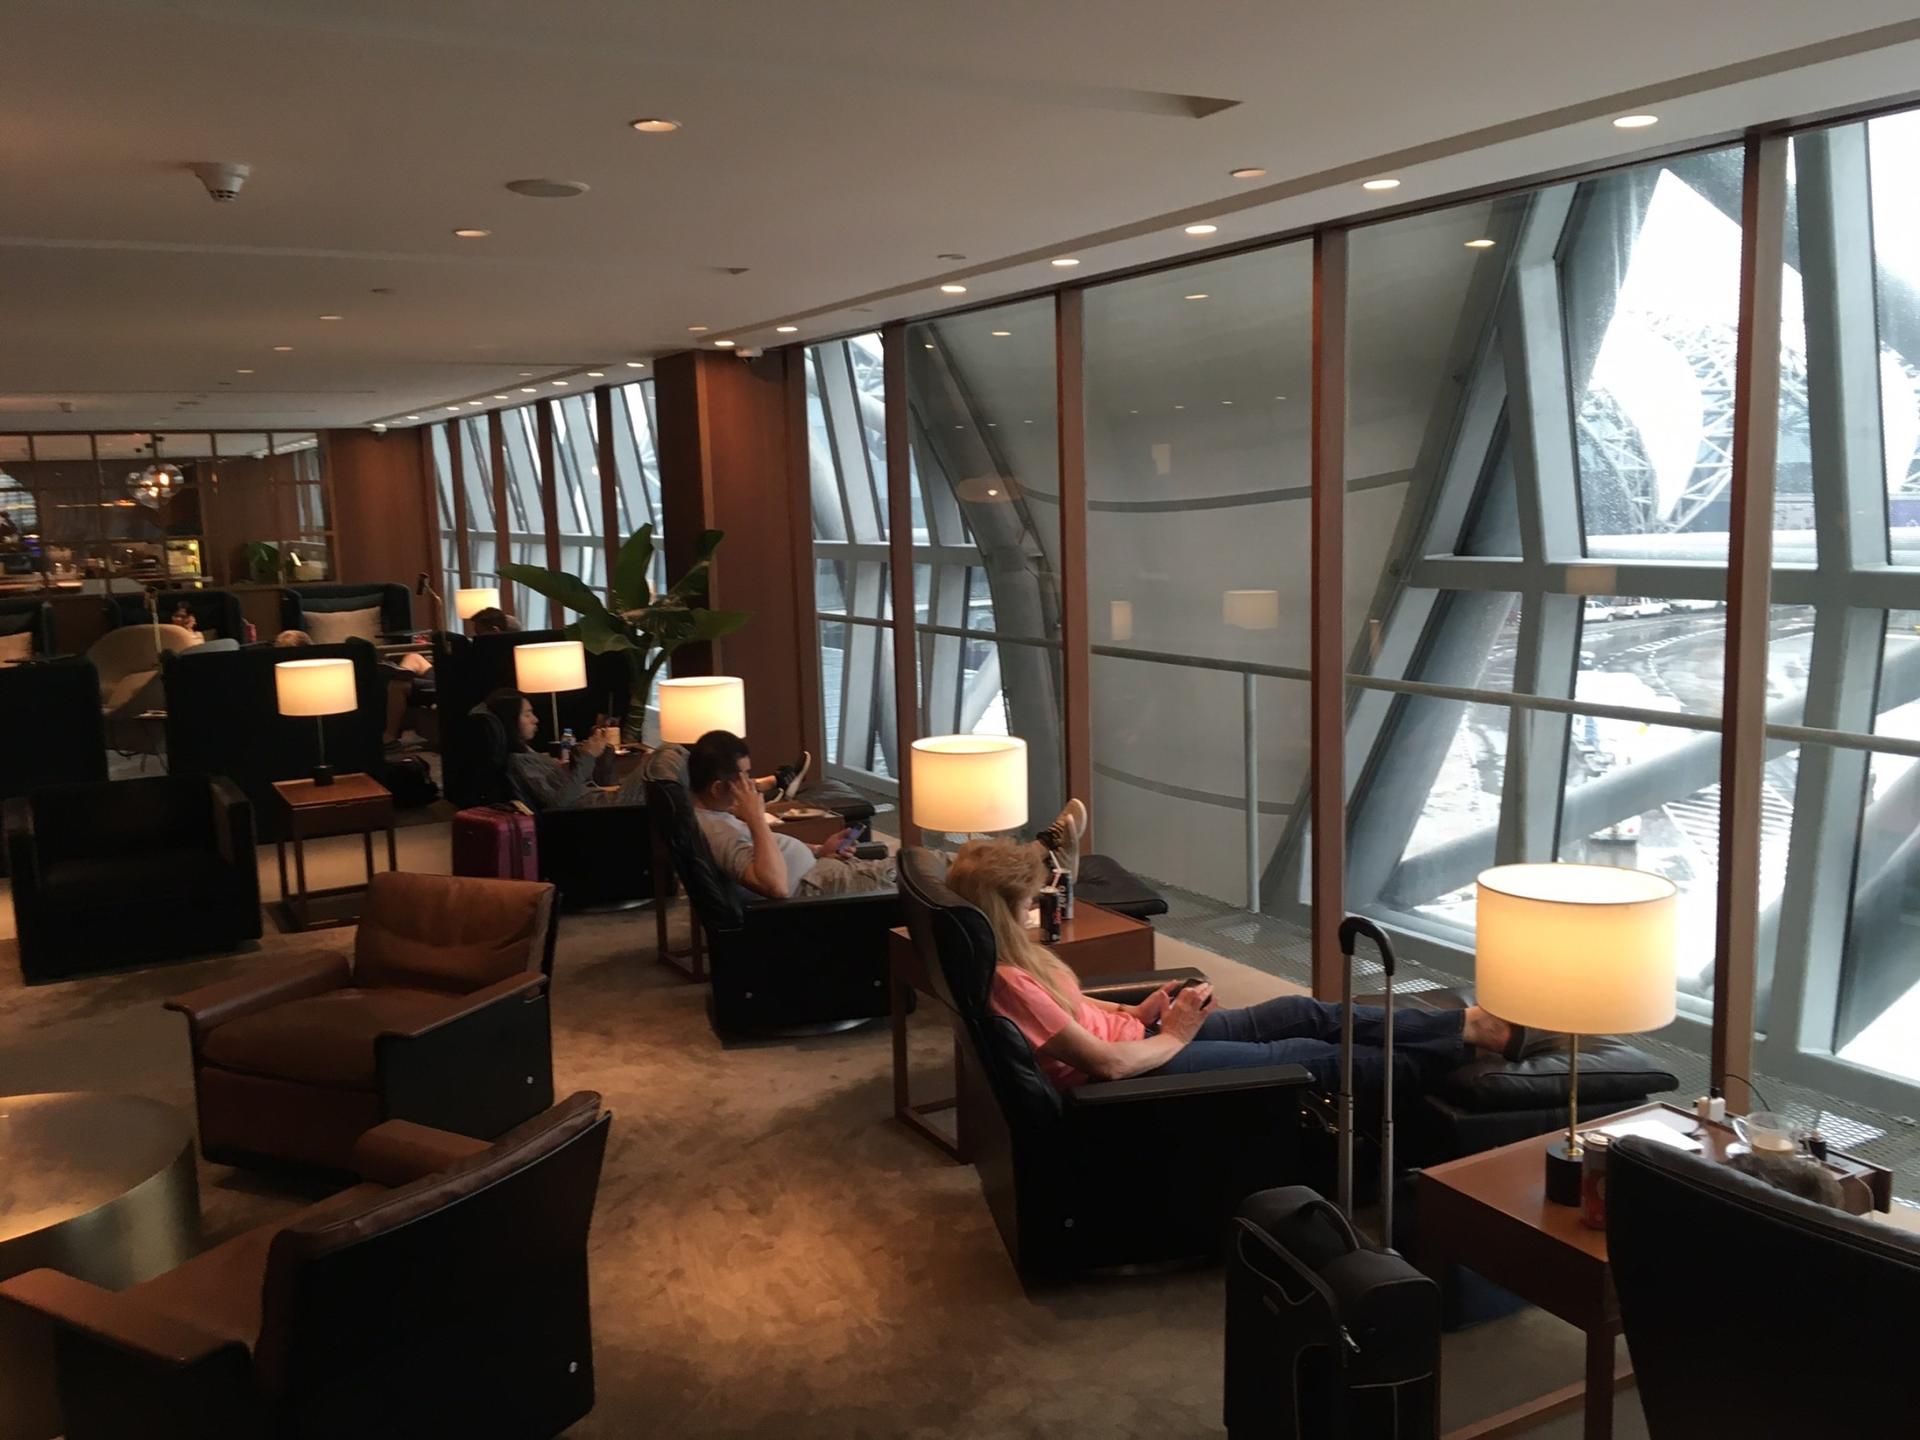 Cathay Pacific First and Business Class Lounge image 58 of 69